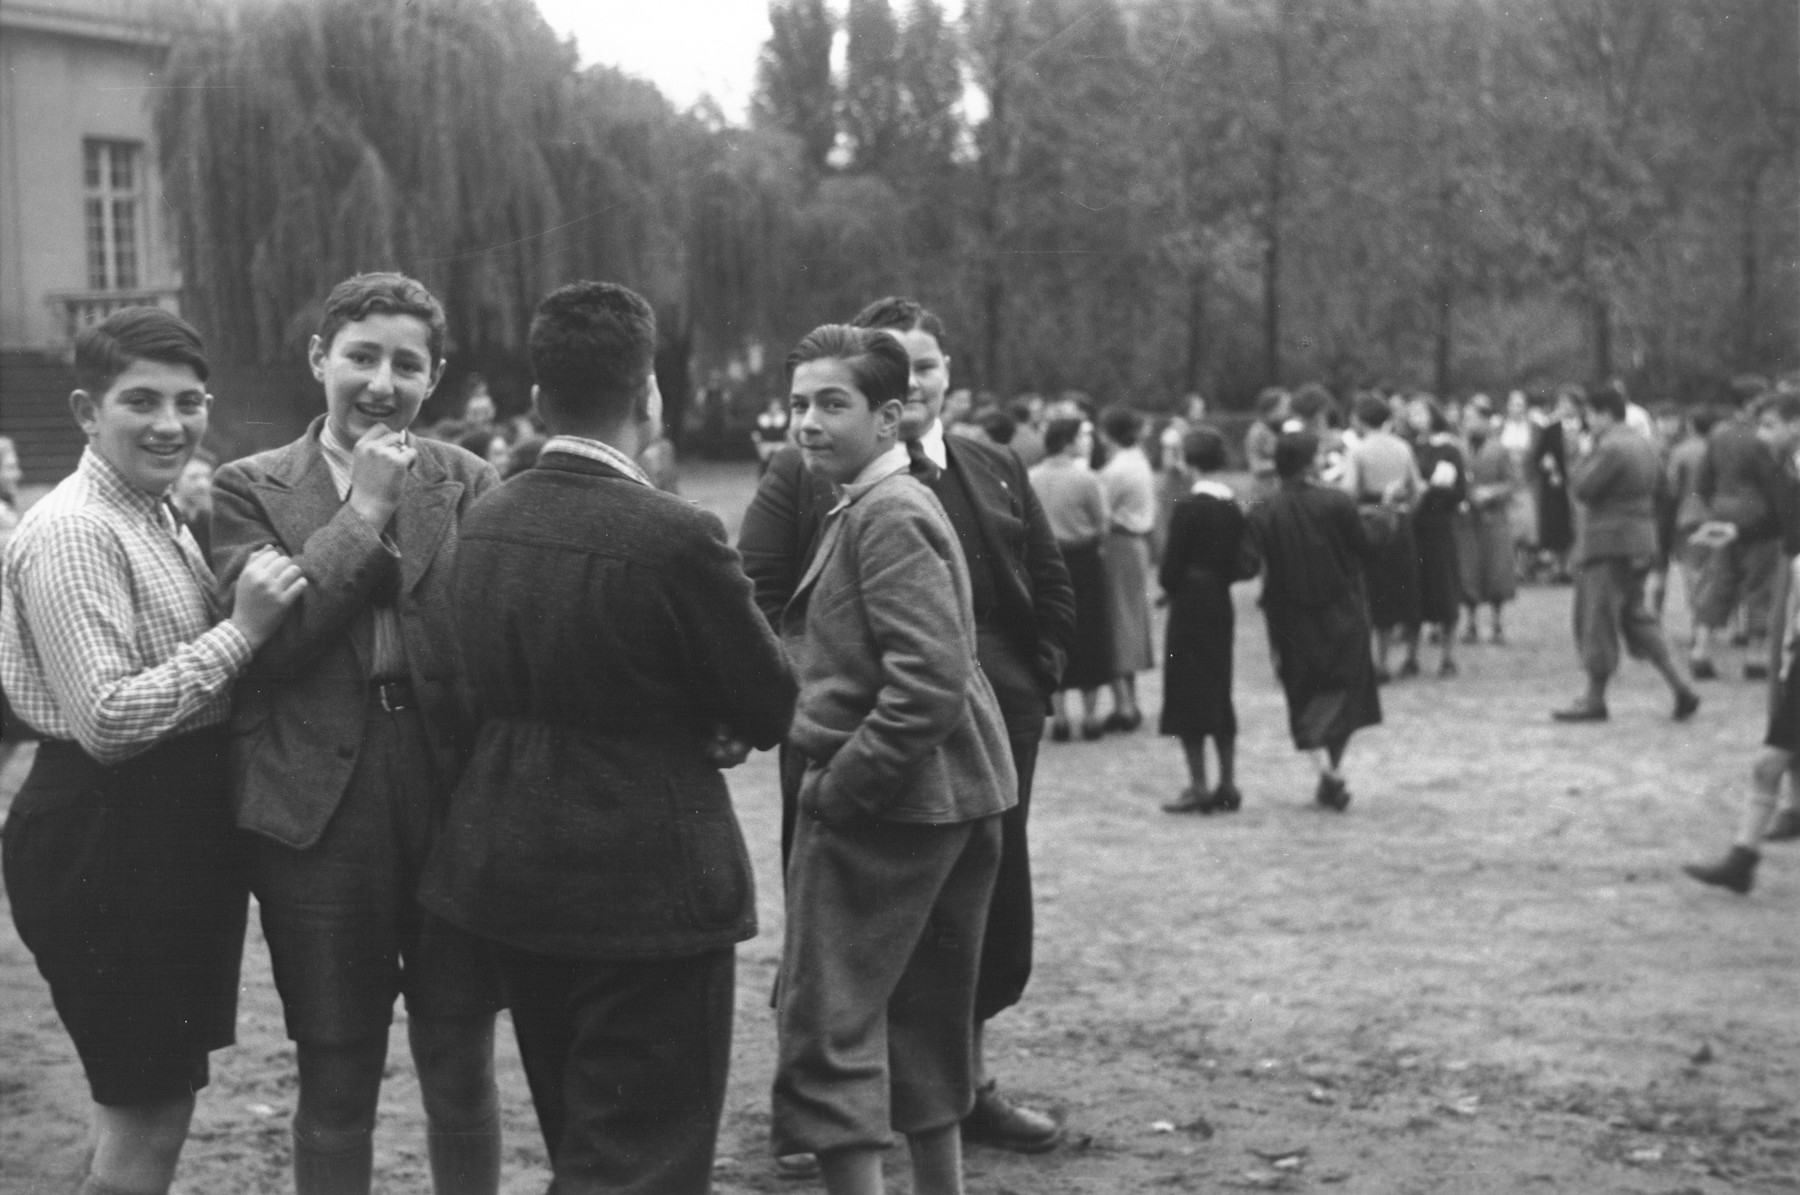 A group of teenage boys stands outside on the grounds of the Goldschmidt Jewish private school in Berlin-Grunewald.